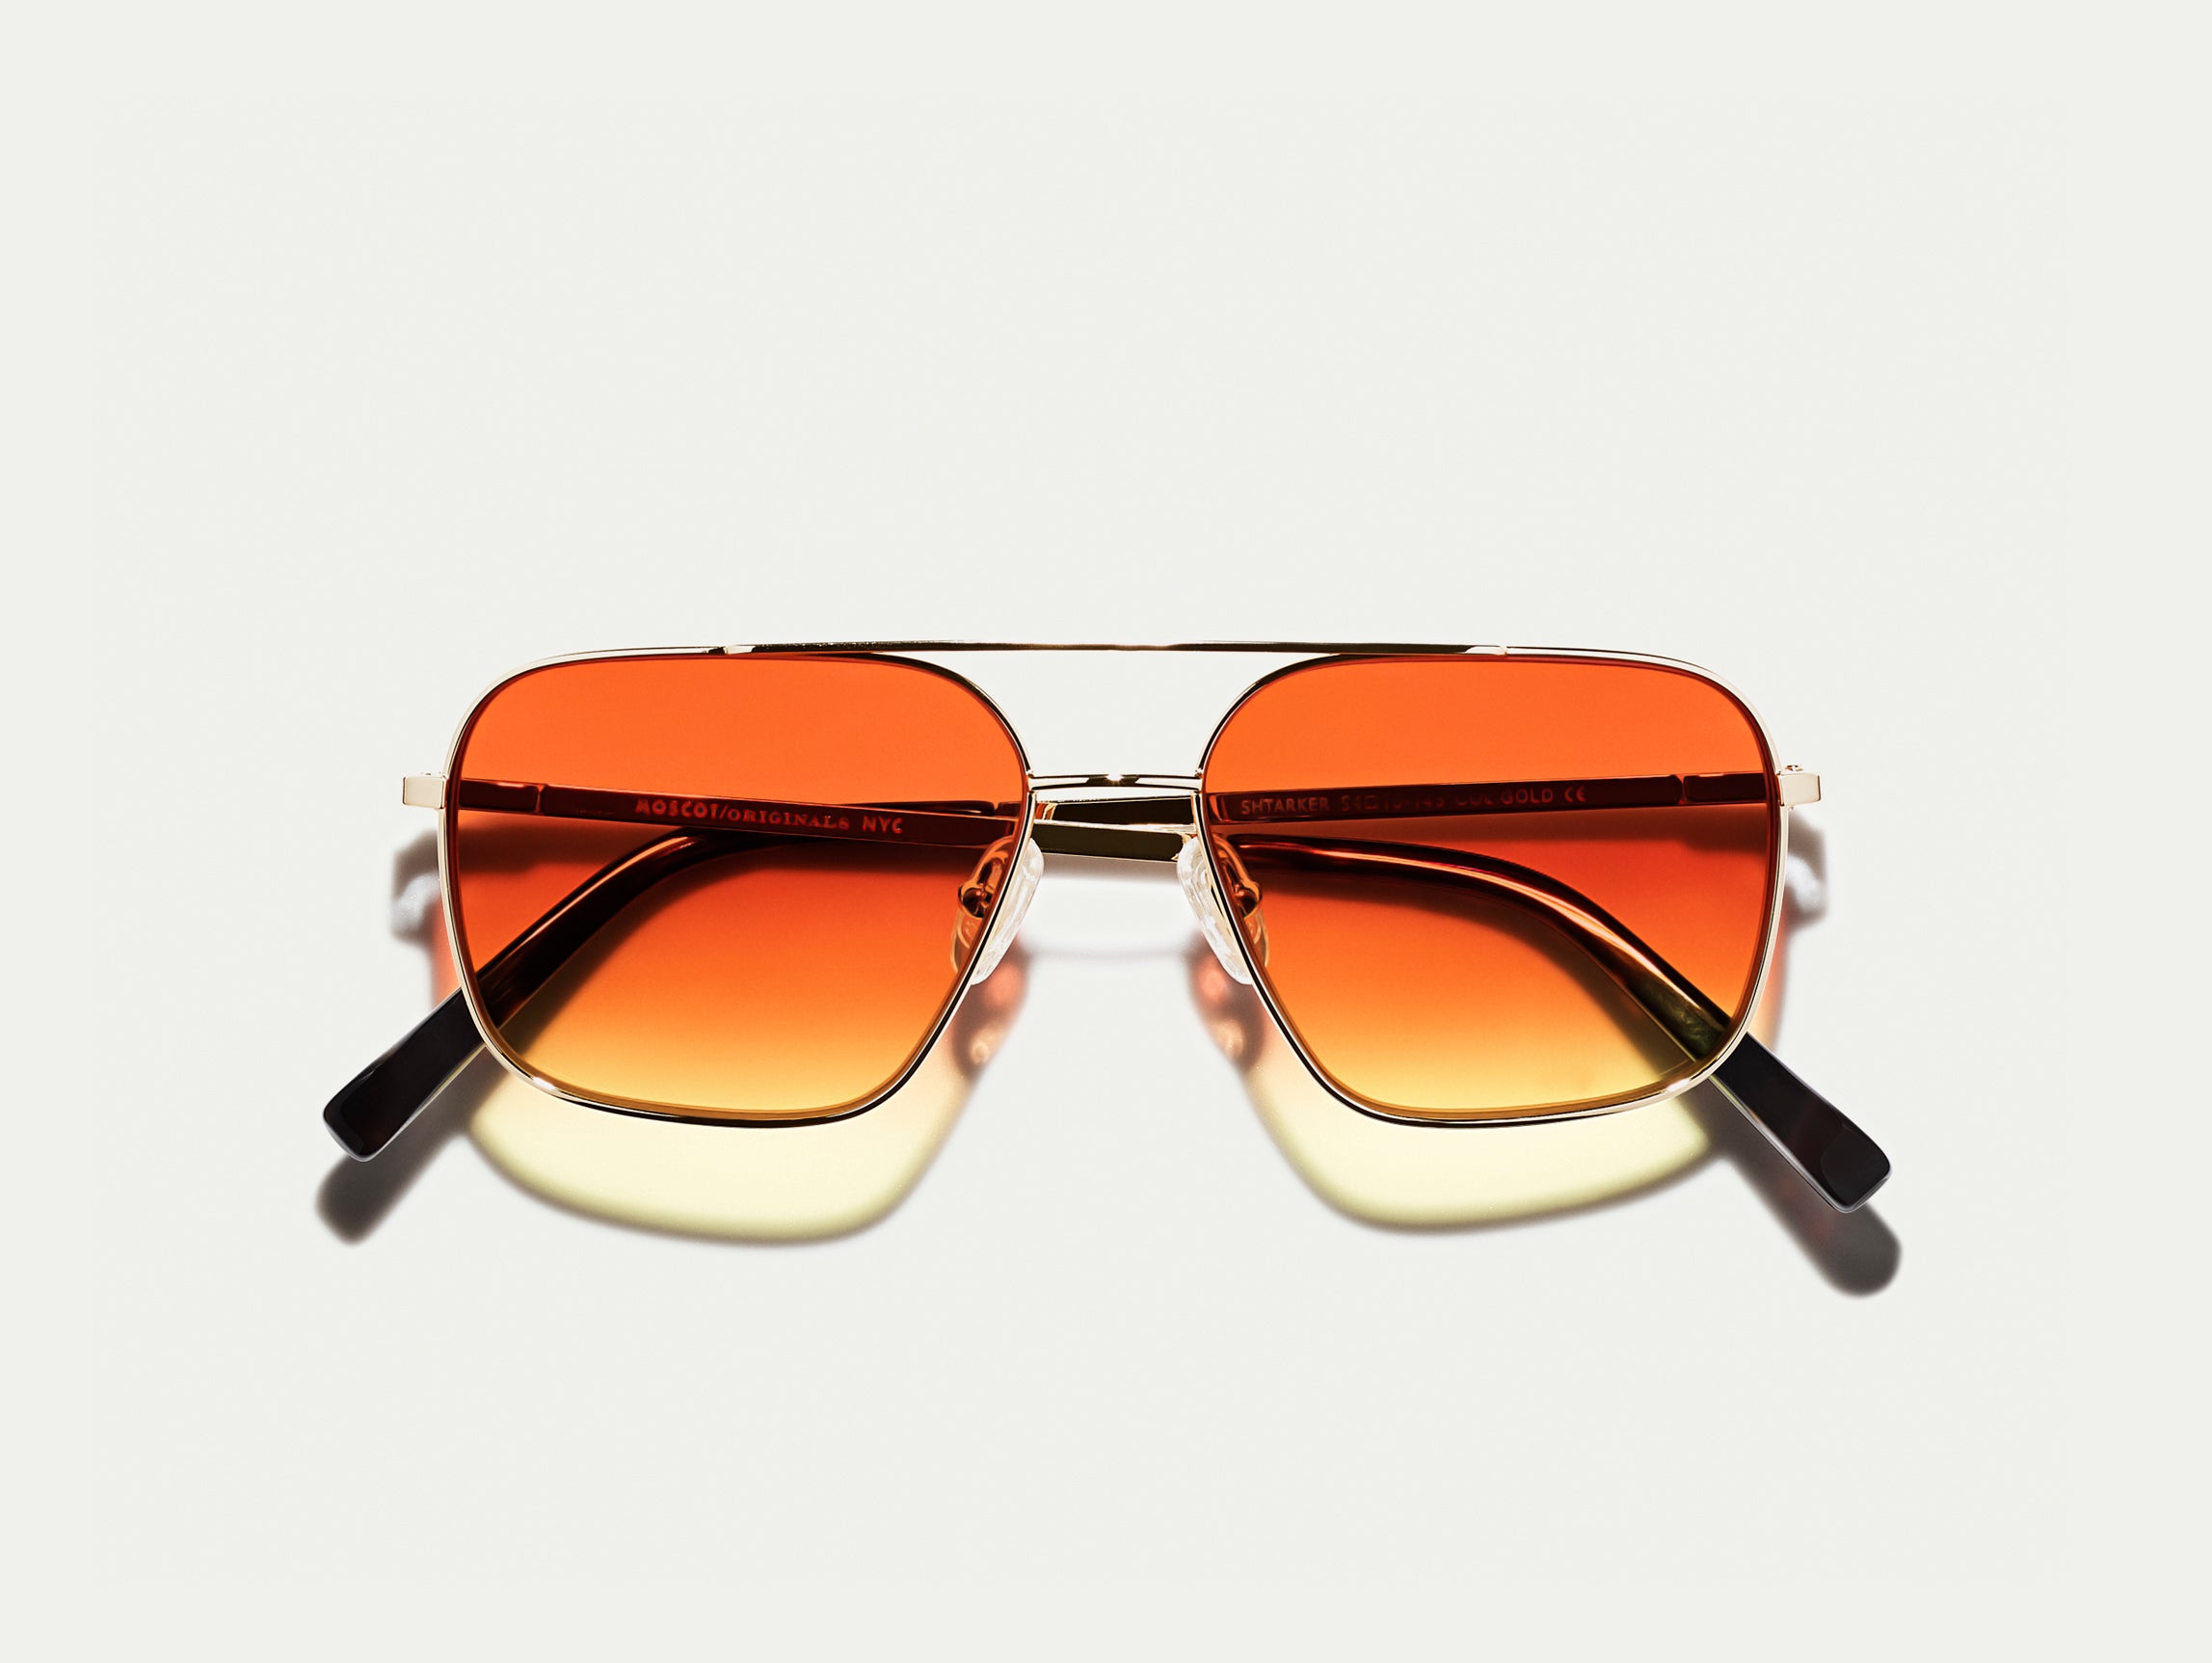 #color_candy corn | The SHTARKER in Gold with Candy Corn Tinted Lenses